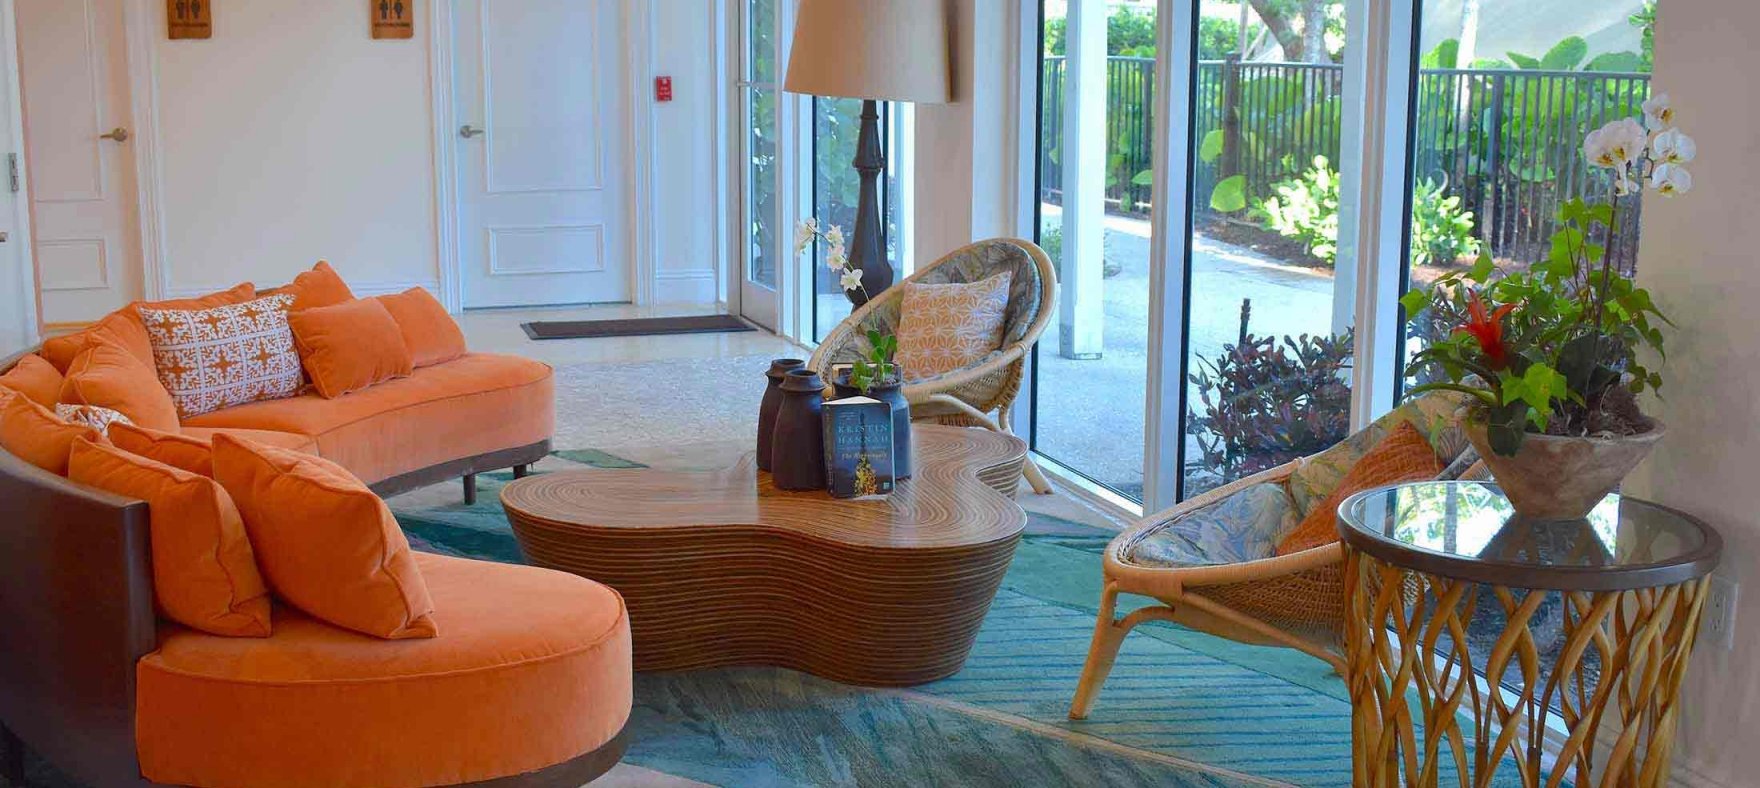 A close-up of a curved sofa next to a pair of woven hoop chairs and a coffee table in the center